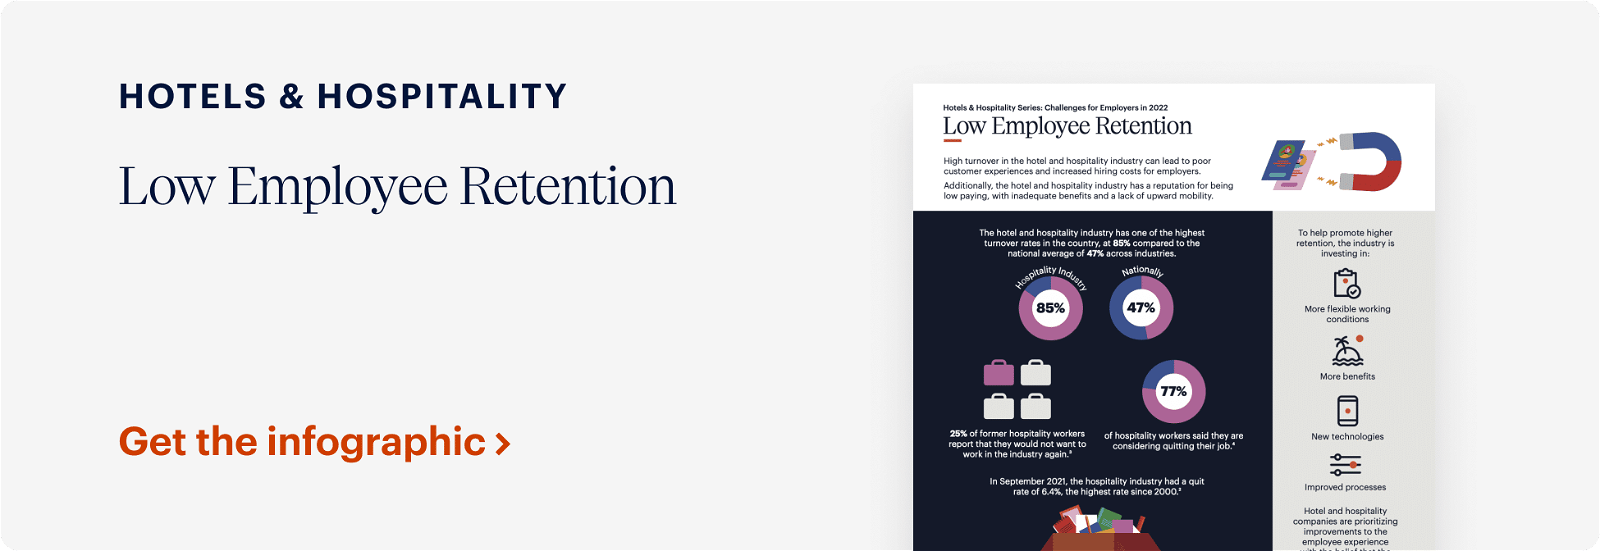 A promotional image highlights a report titled "Low Employee Retention" in the Hotels & Hospitality sector. The report features various statistics and graphics. A call-to-action text, "Get the infographic," appears in orange at the bottom left. The image background is white and light gray.